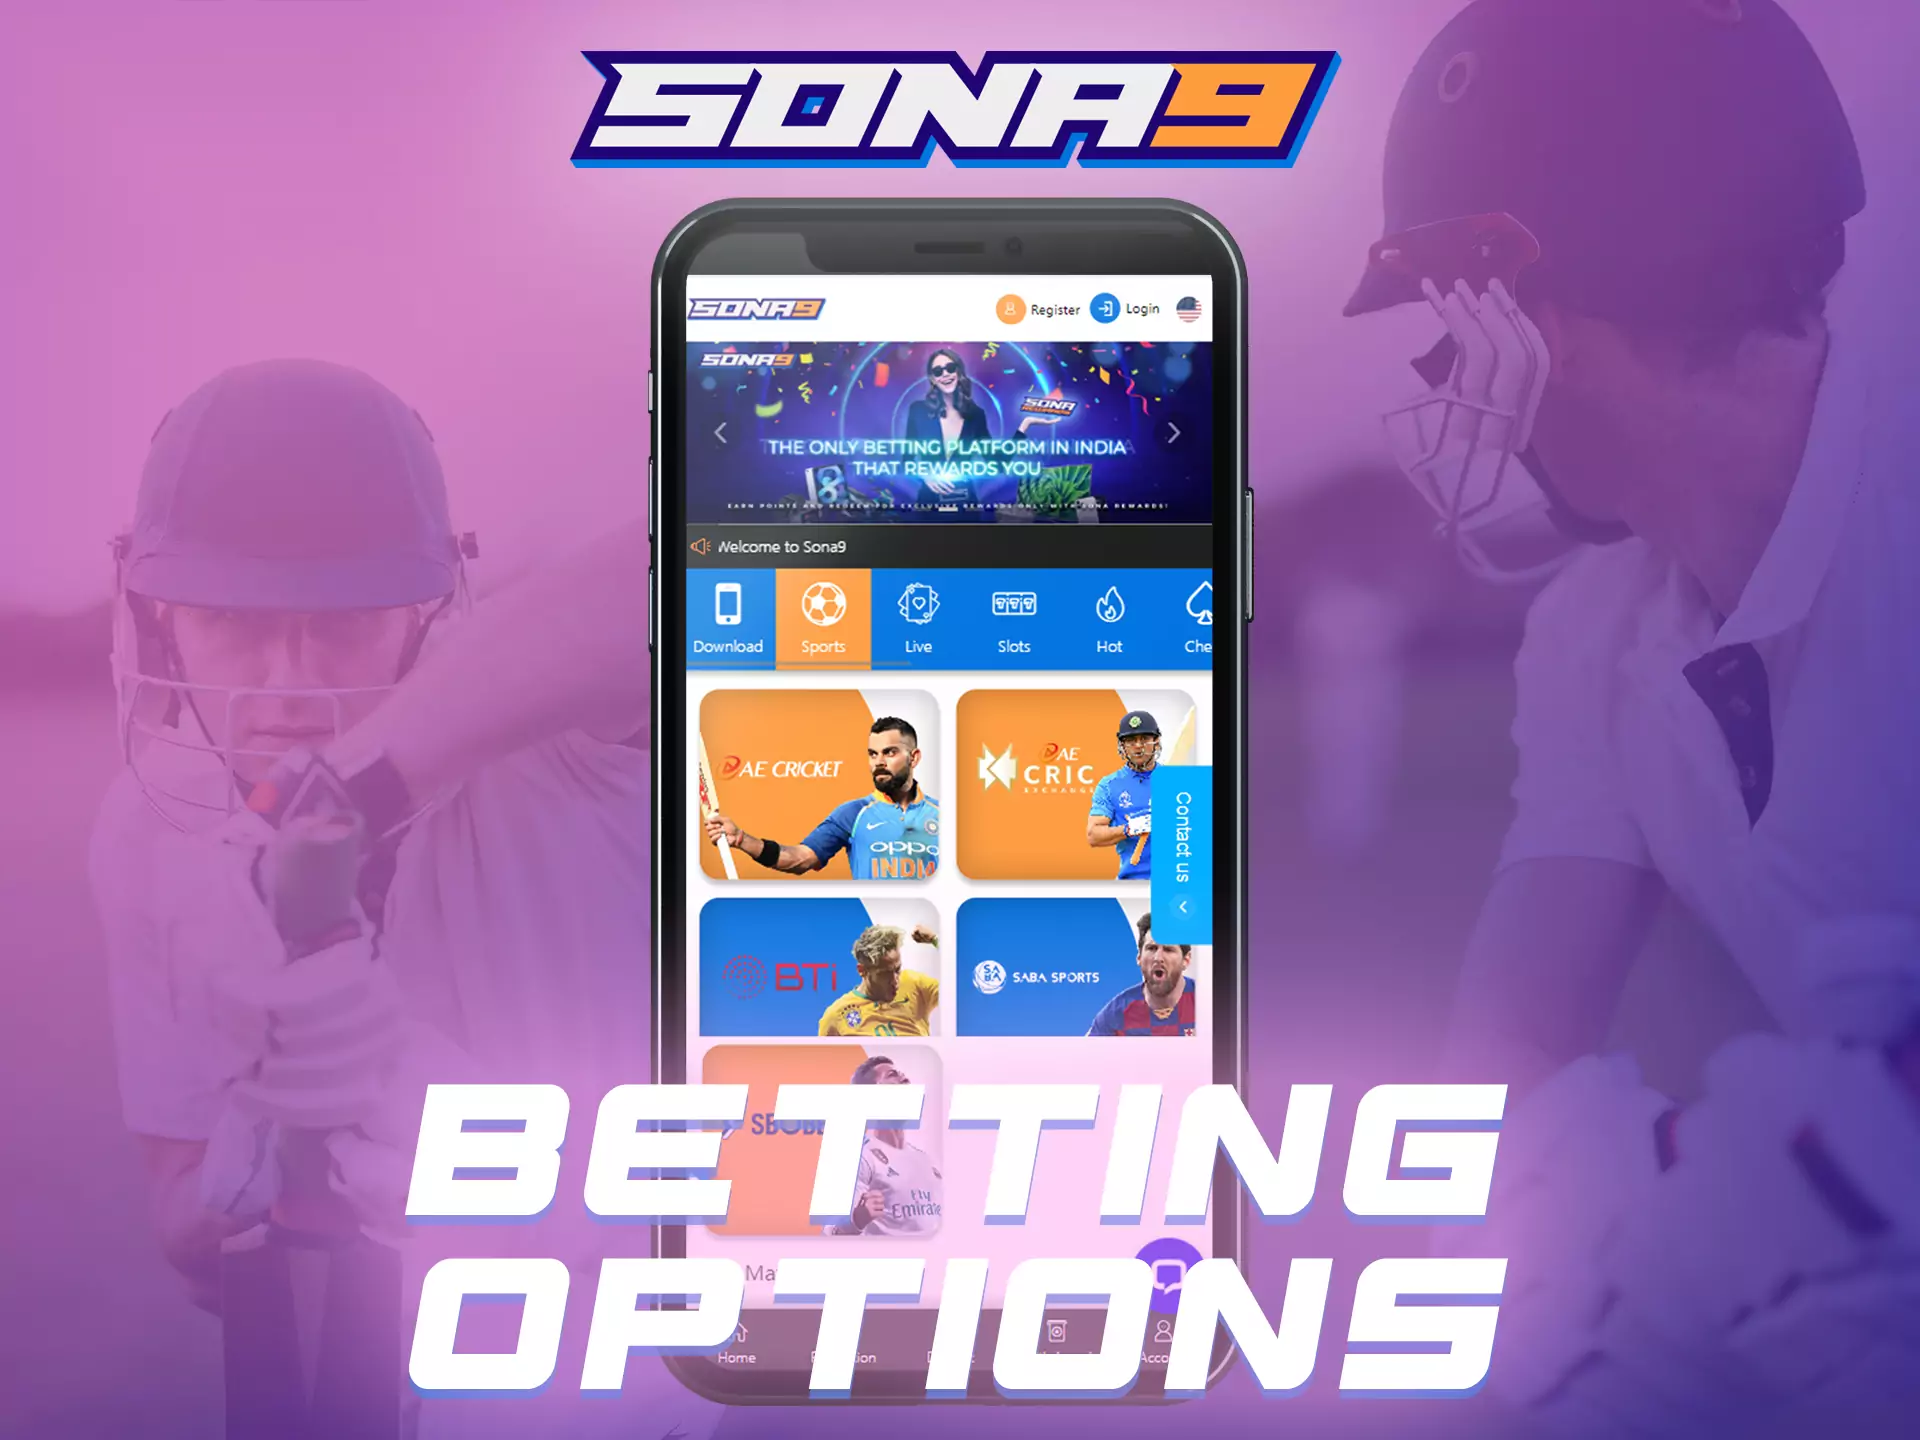 In the Sona9 app, you find many different options for placing bets.